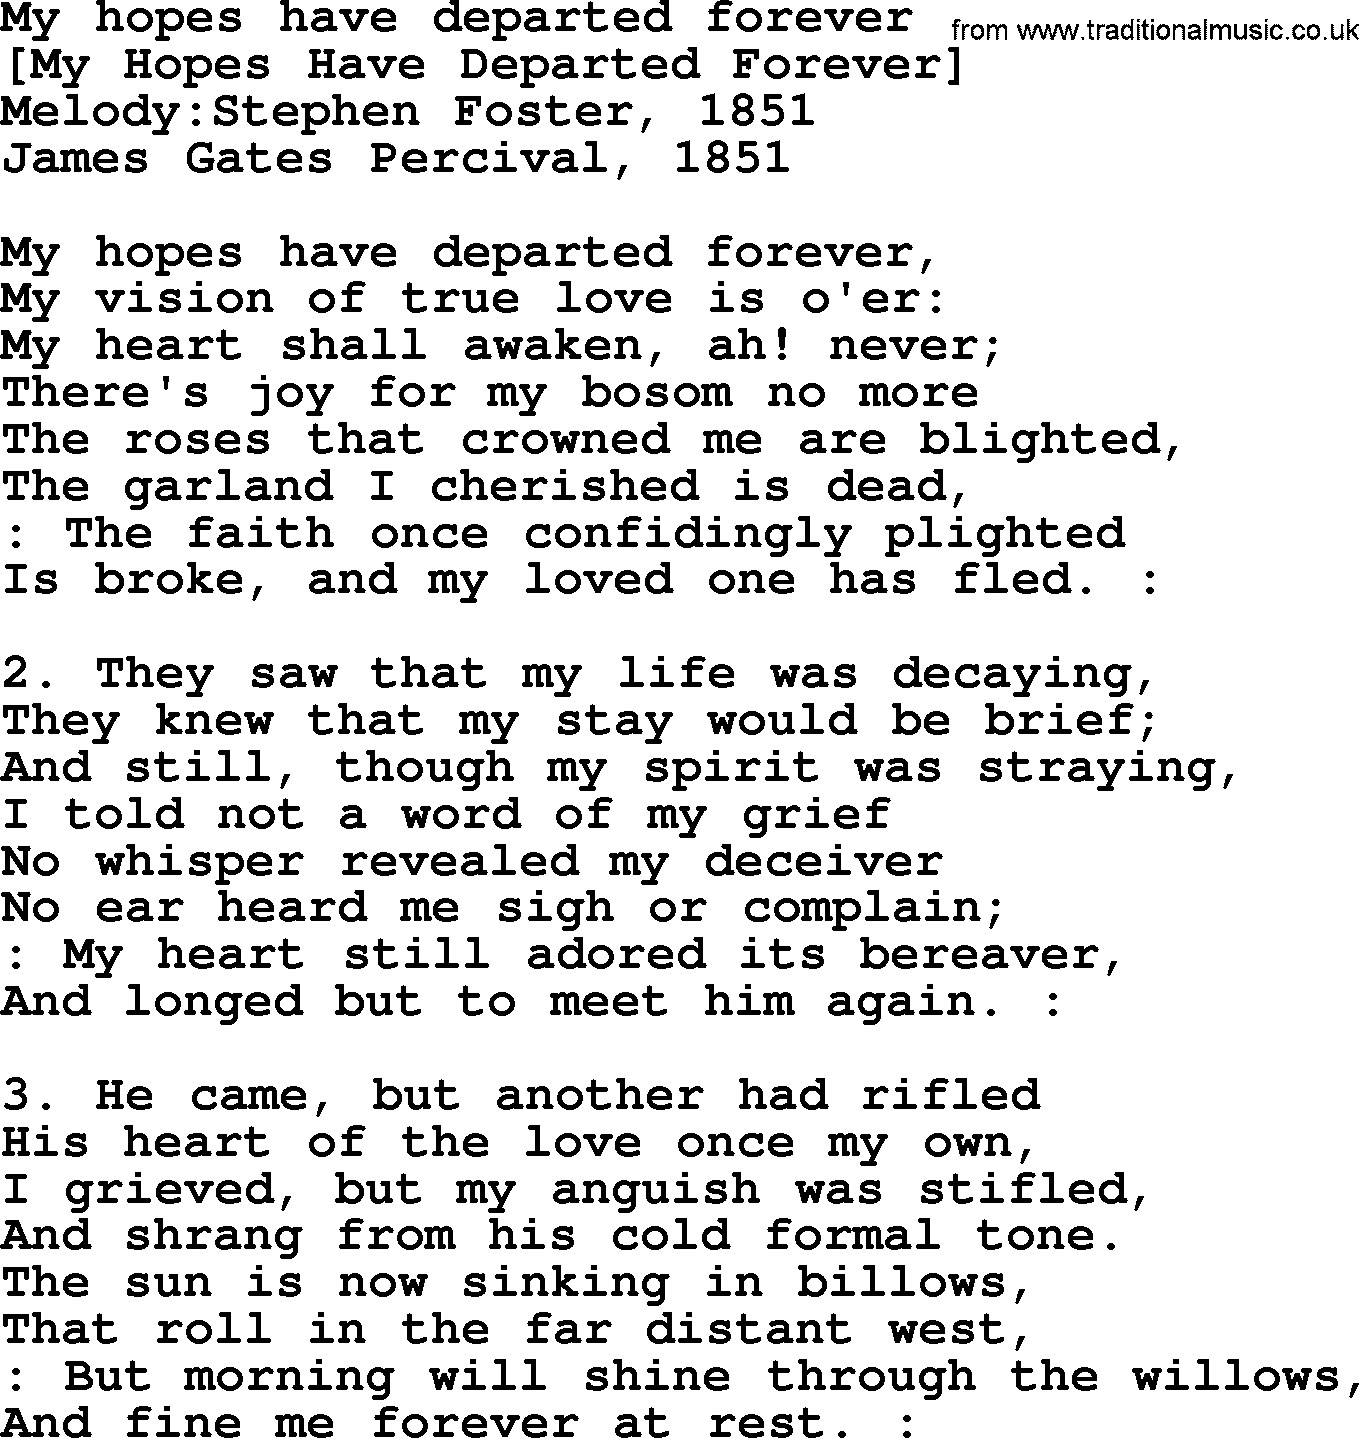 Old American Song: My Hopes Have Departed Forever, lyrics